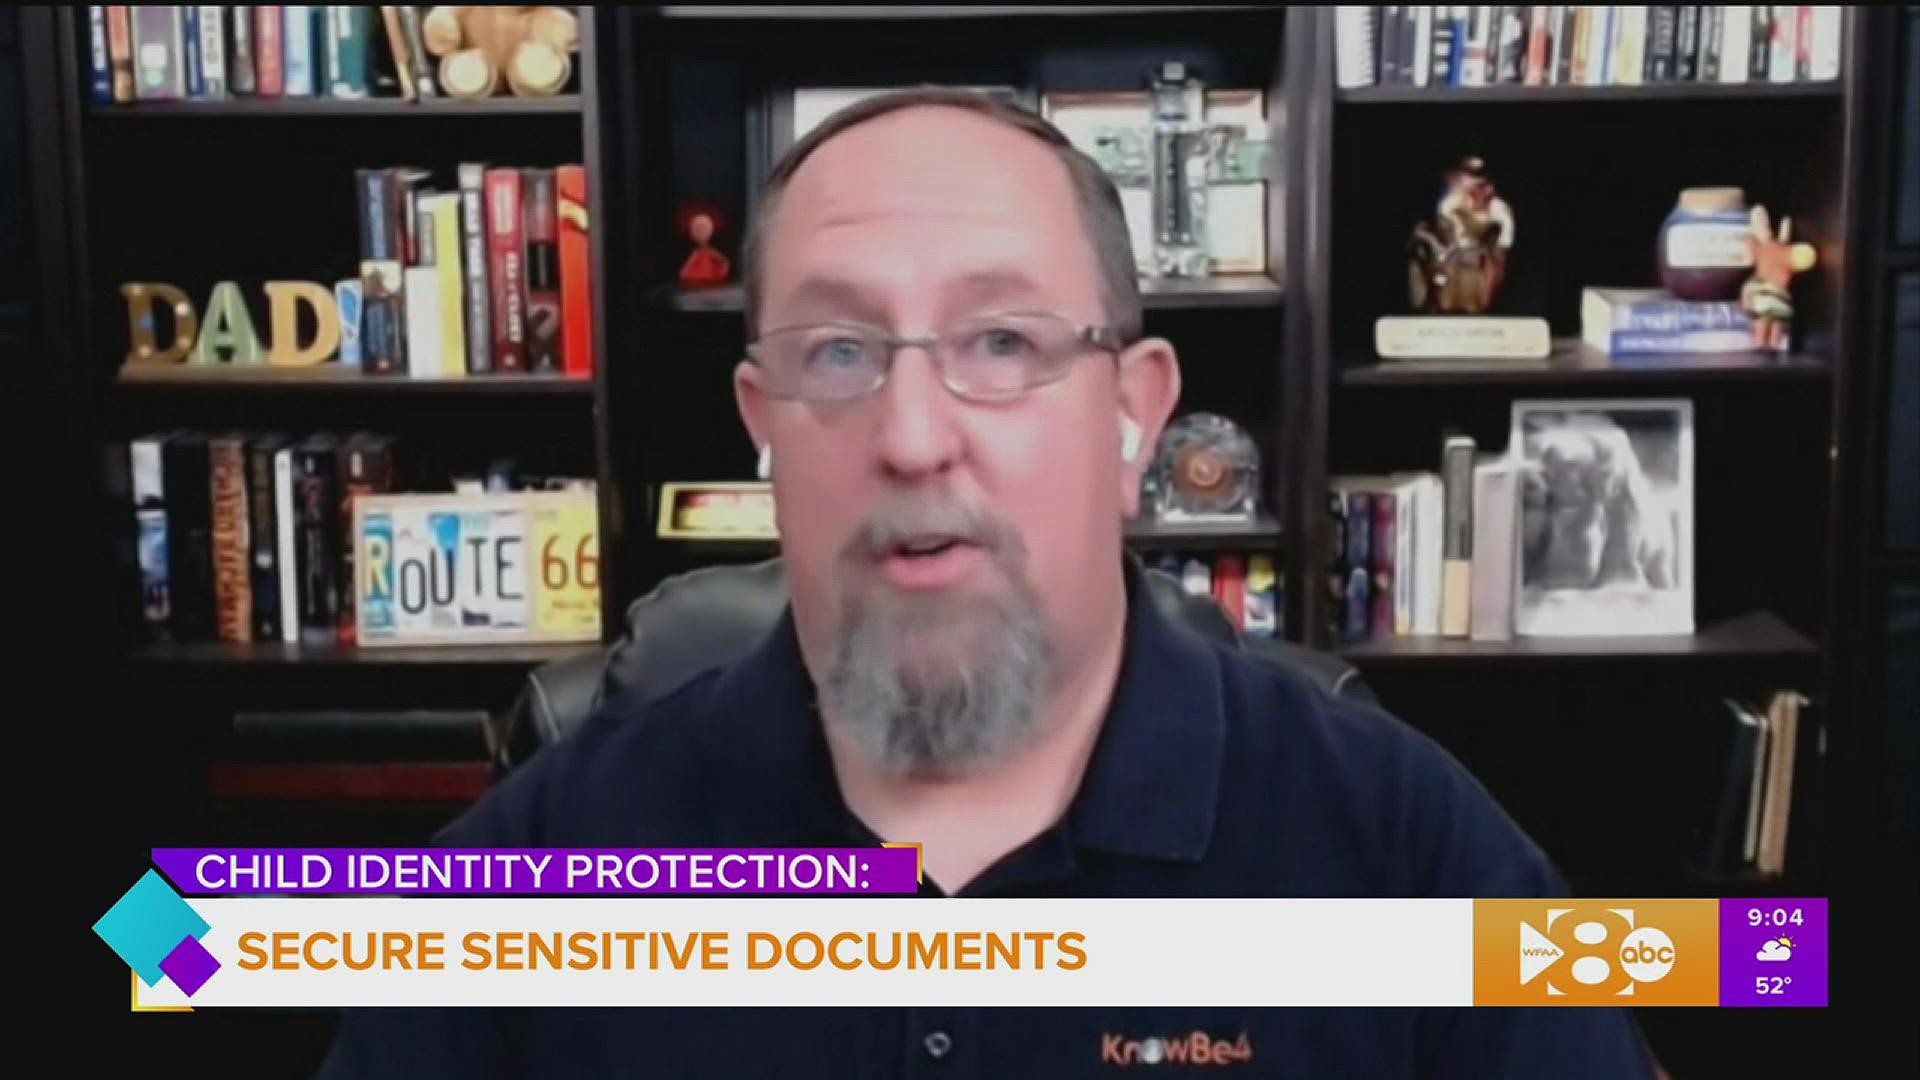 ‘KnowBe4’ security awareness advocate, Erich Kron, shares tips and insight to protect your children from cybercriminals.